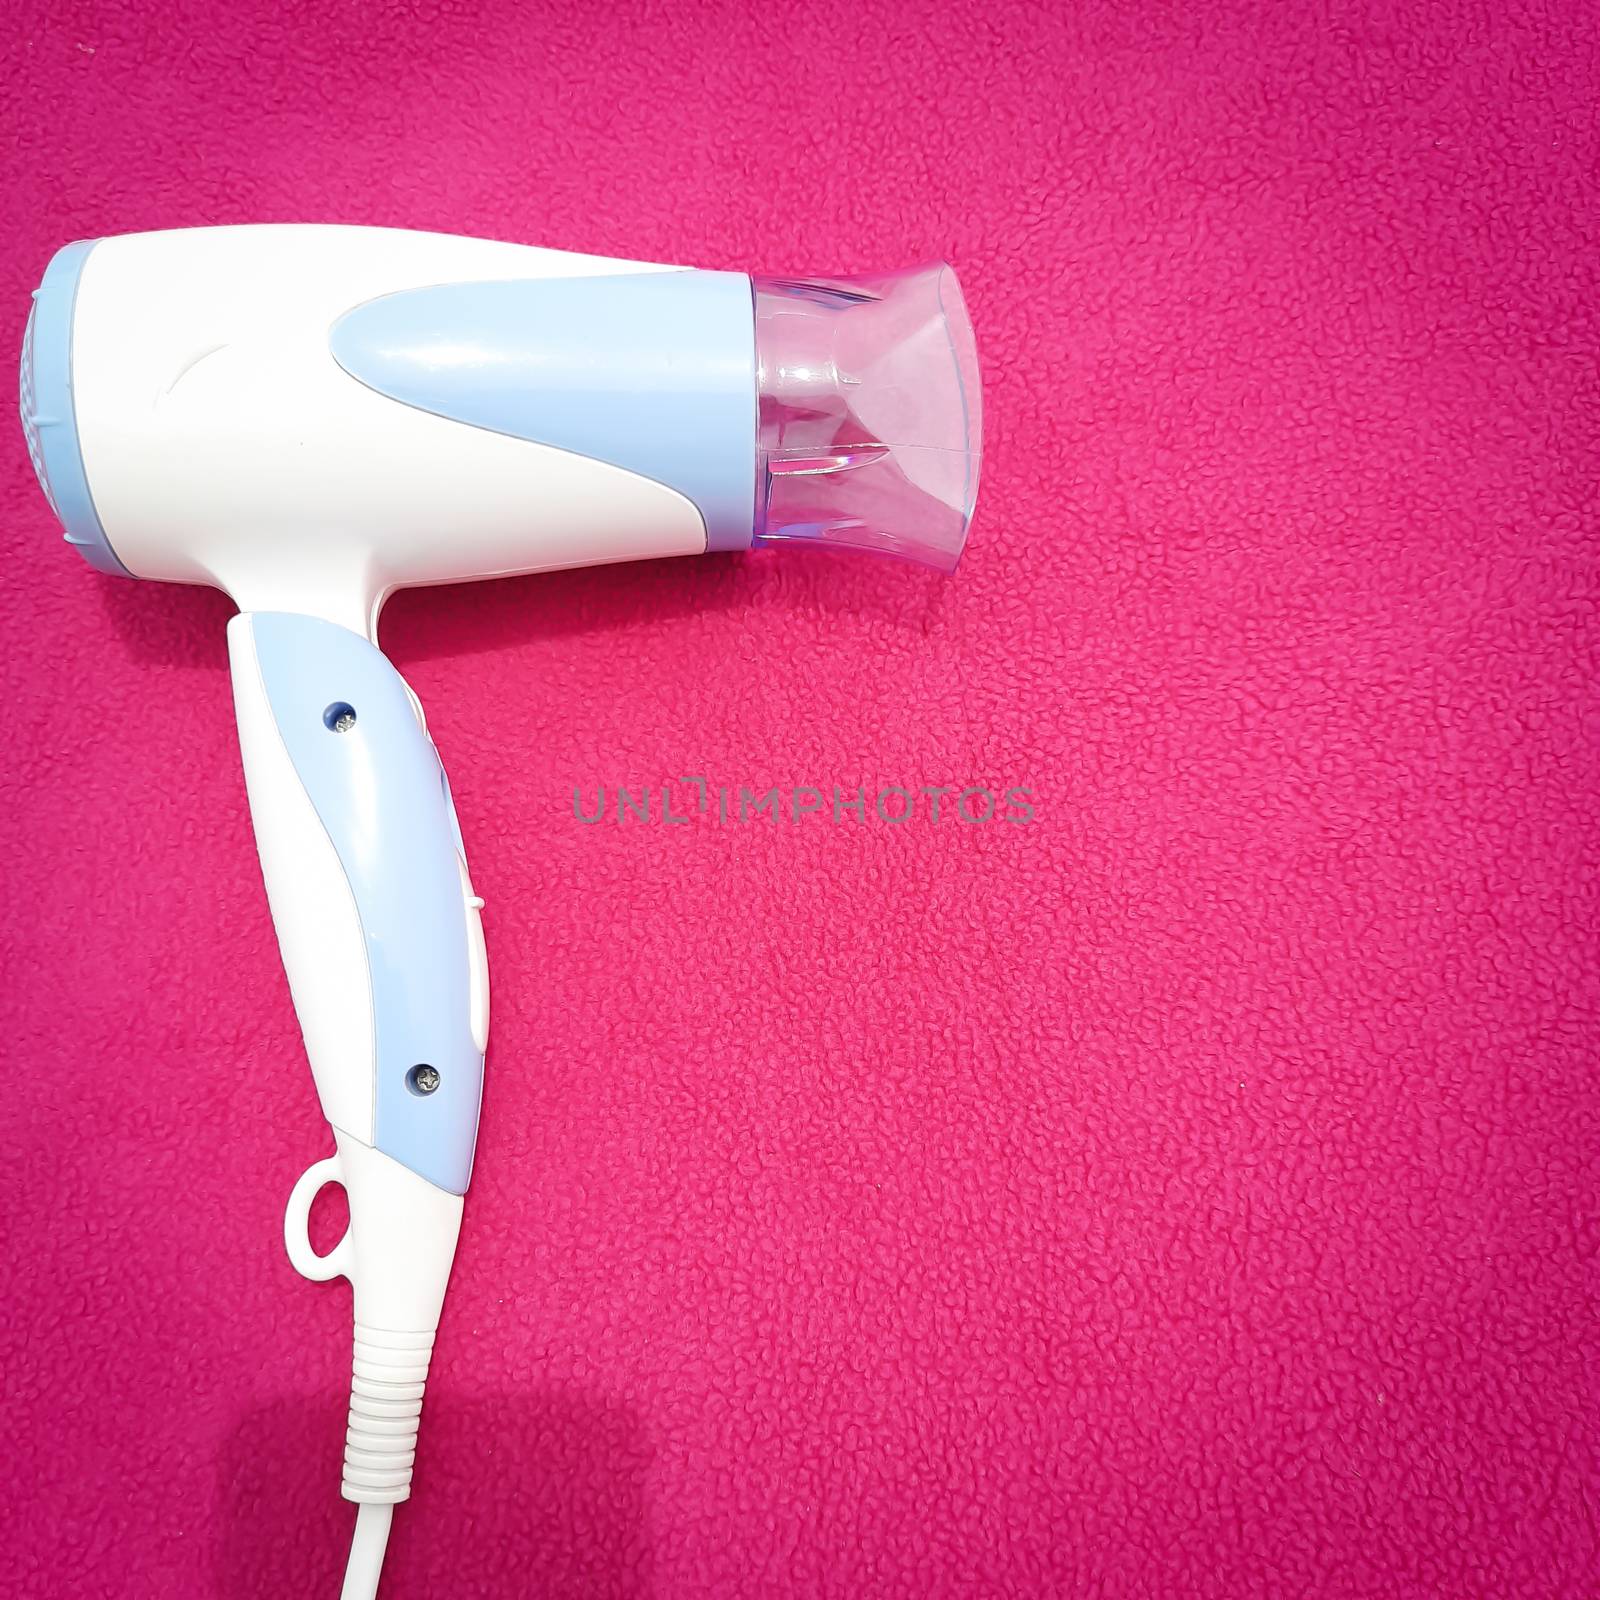 Hair dryer beautifully placed in pink background